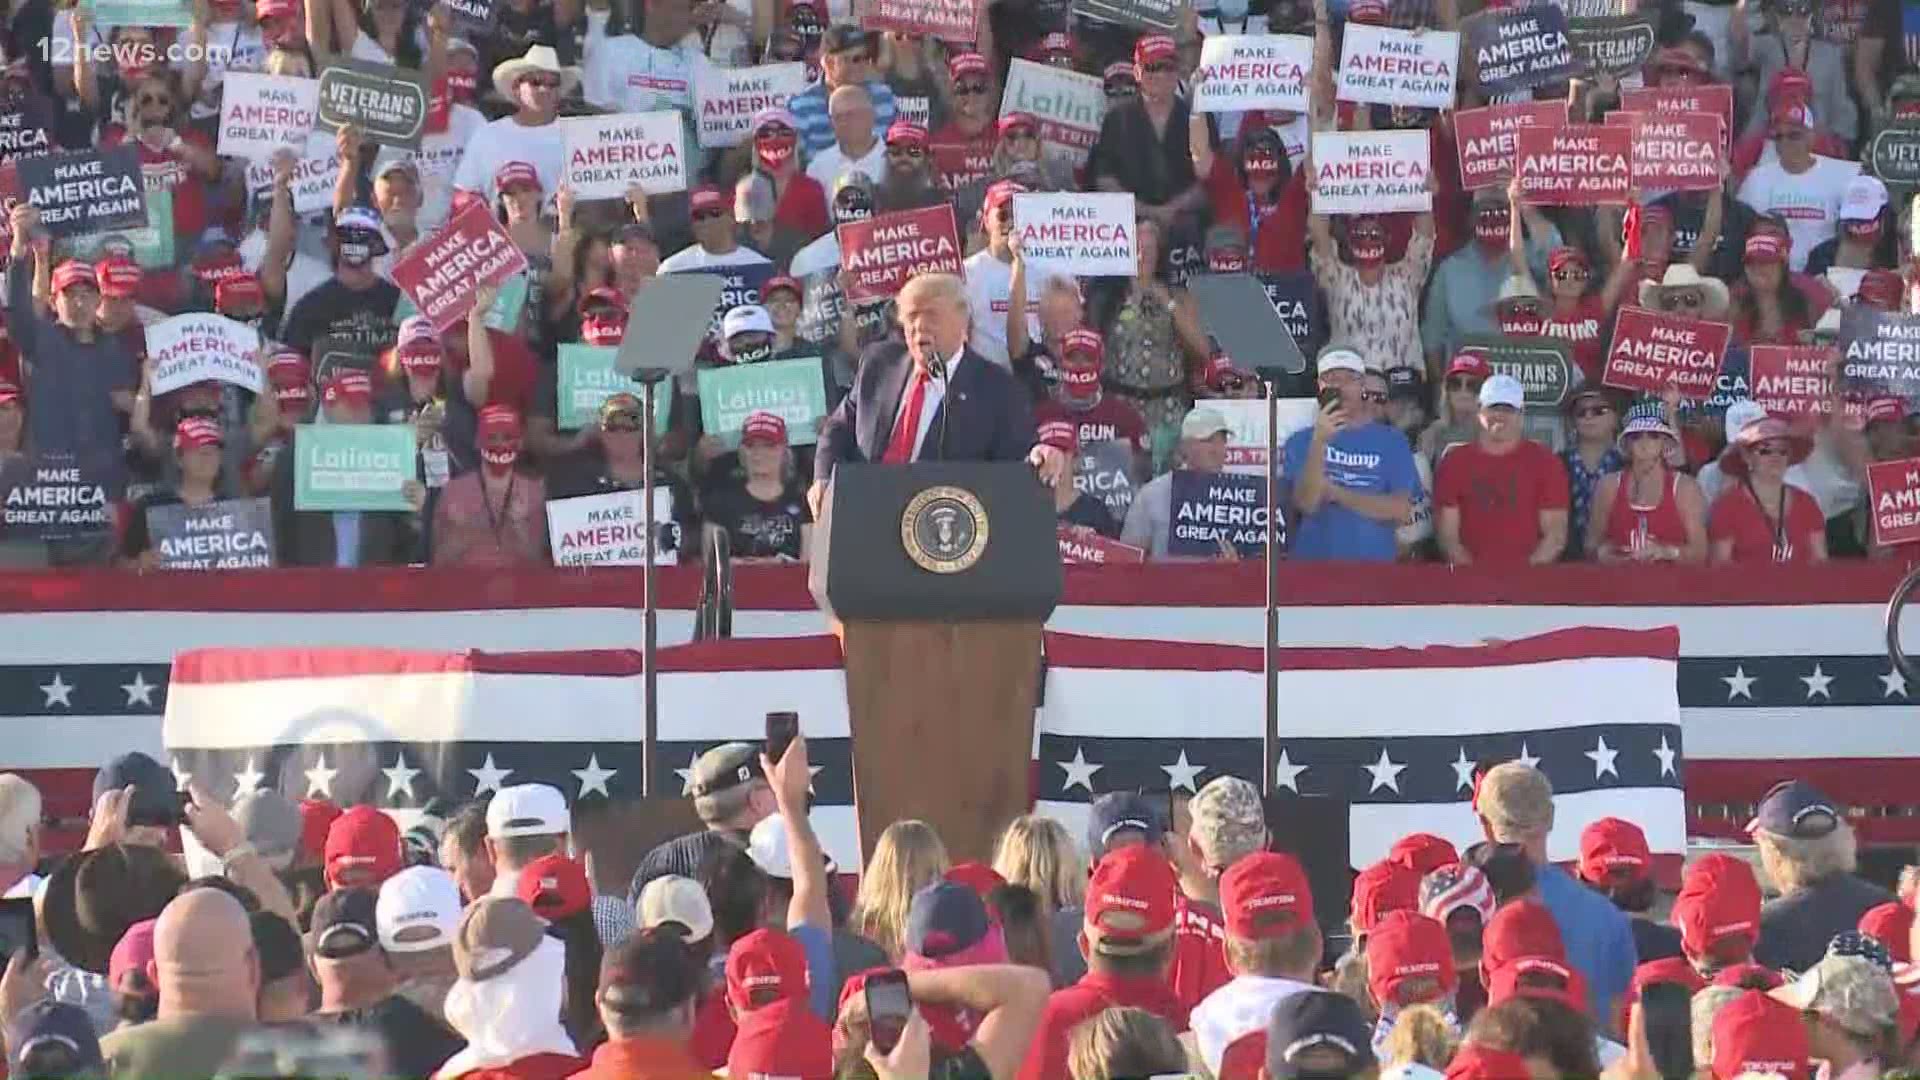 More than a thousand supporters in Tucson came to see the president speak on Monday. The city's mayor said he was welcome but made it clear she doesn't support him.